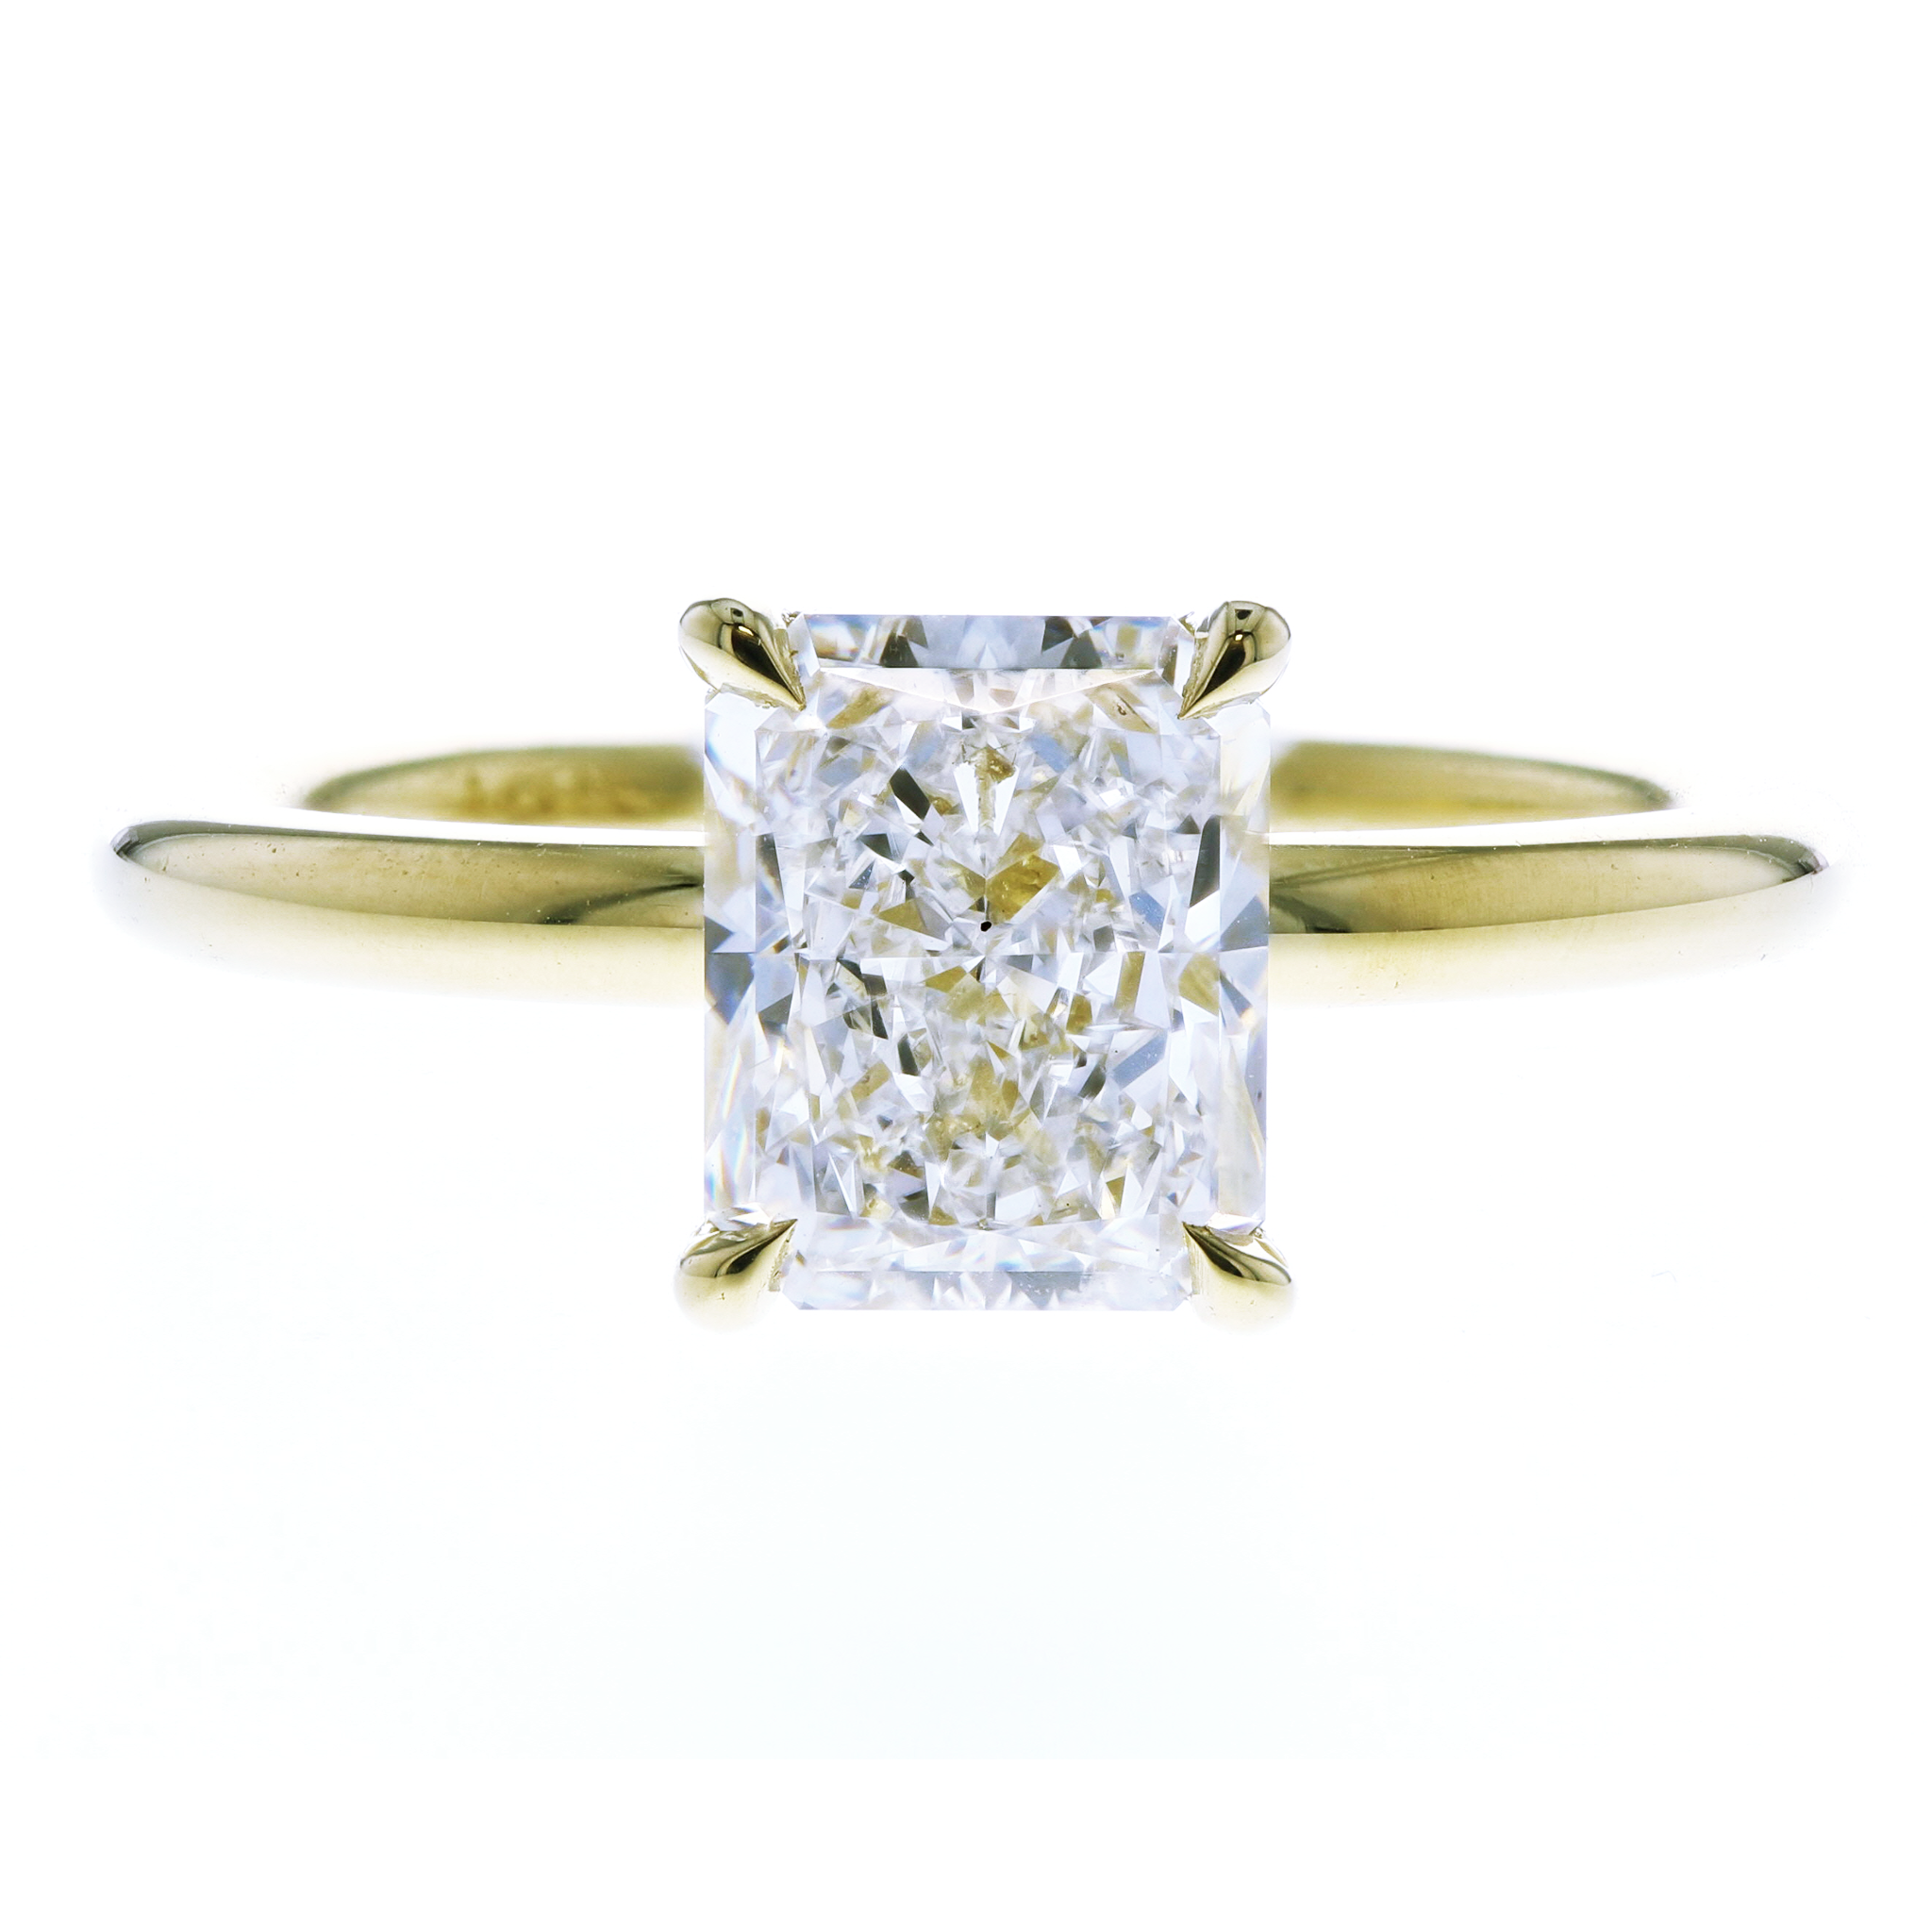 Radiant Cut Solitaire Diamond Engagement Ring in Yellow Gold